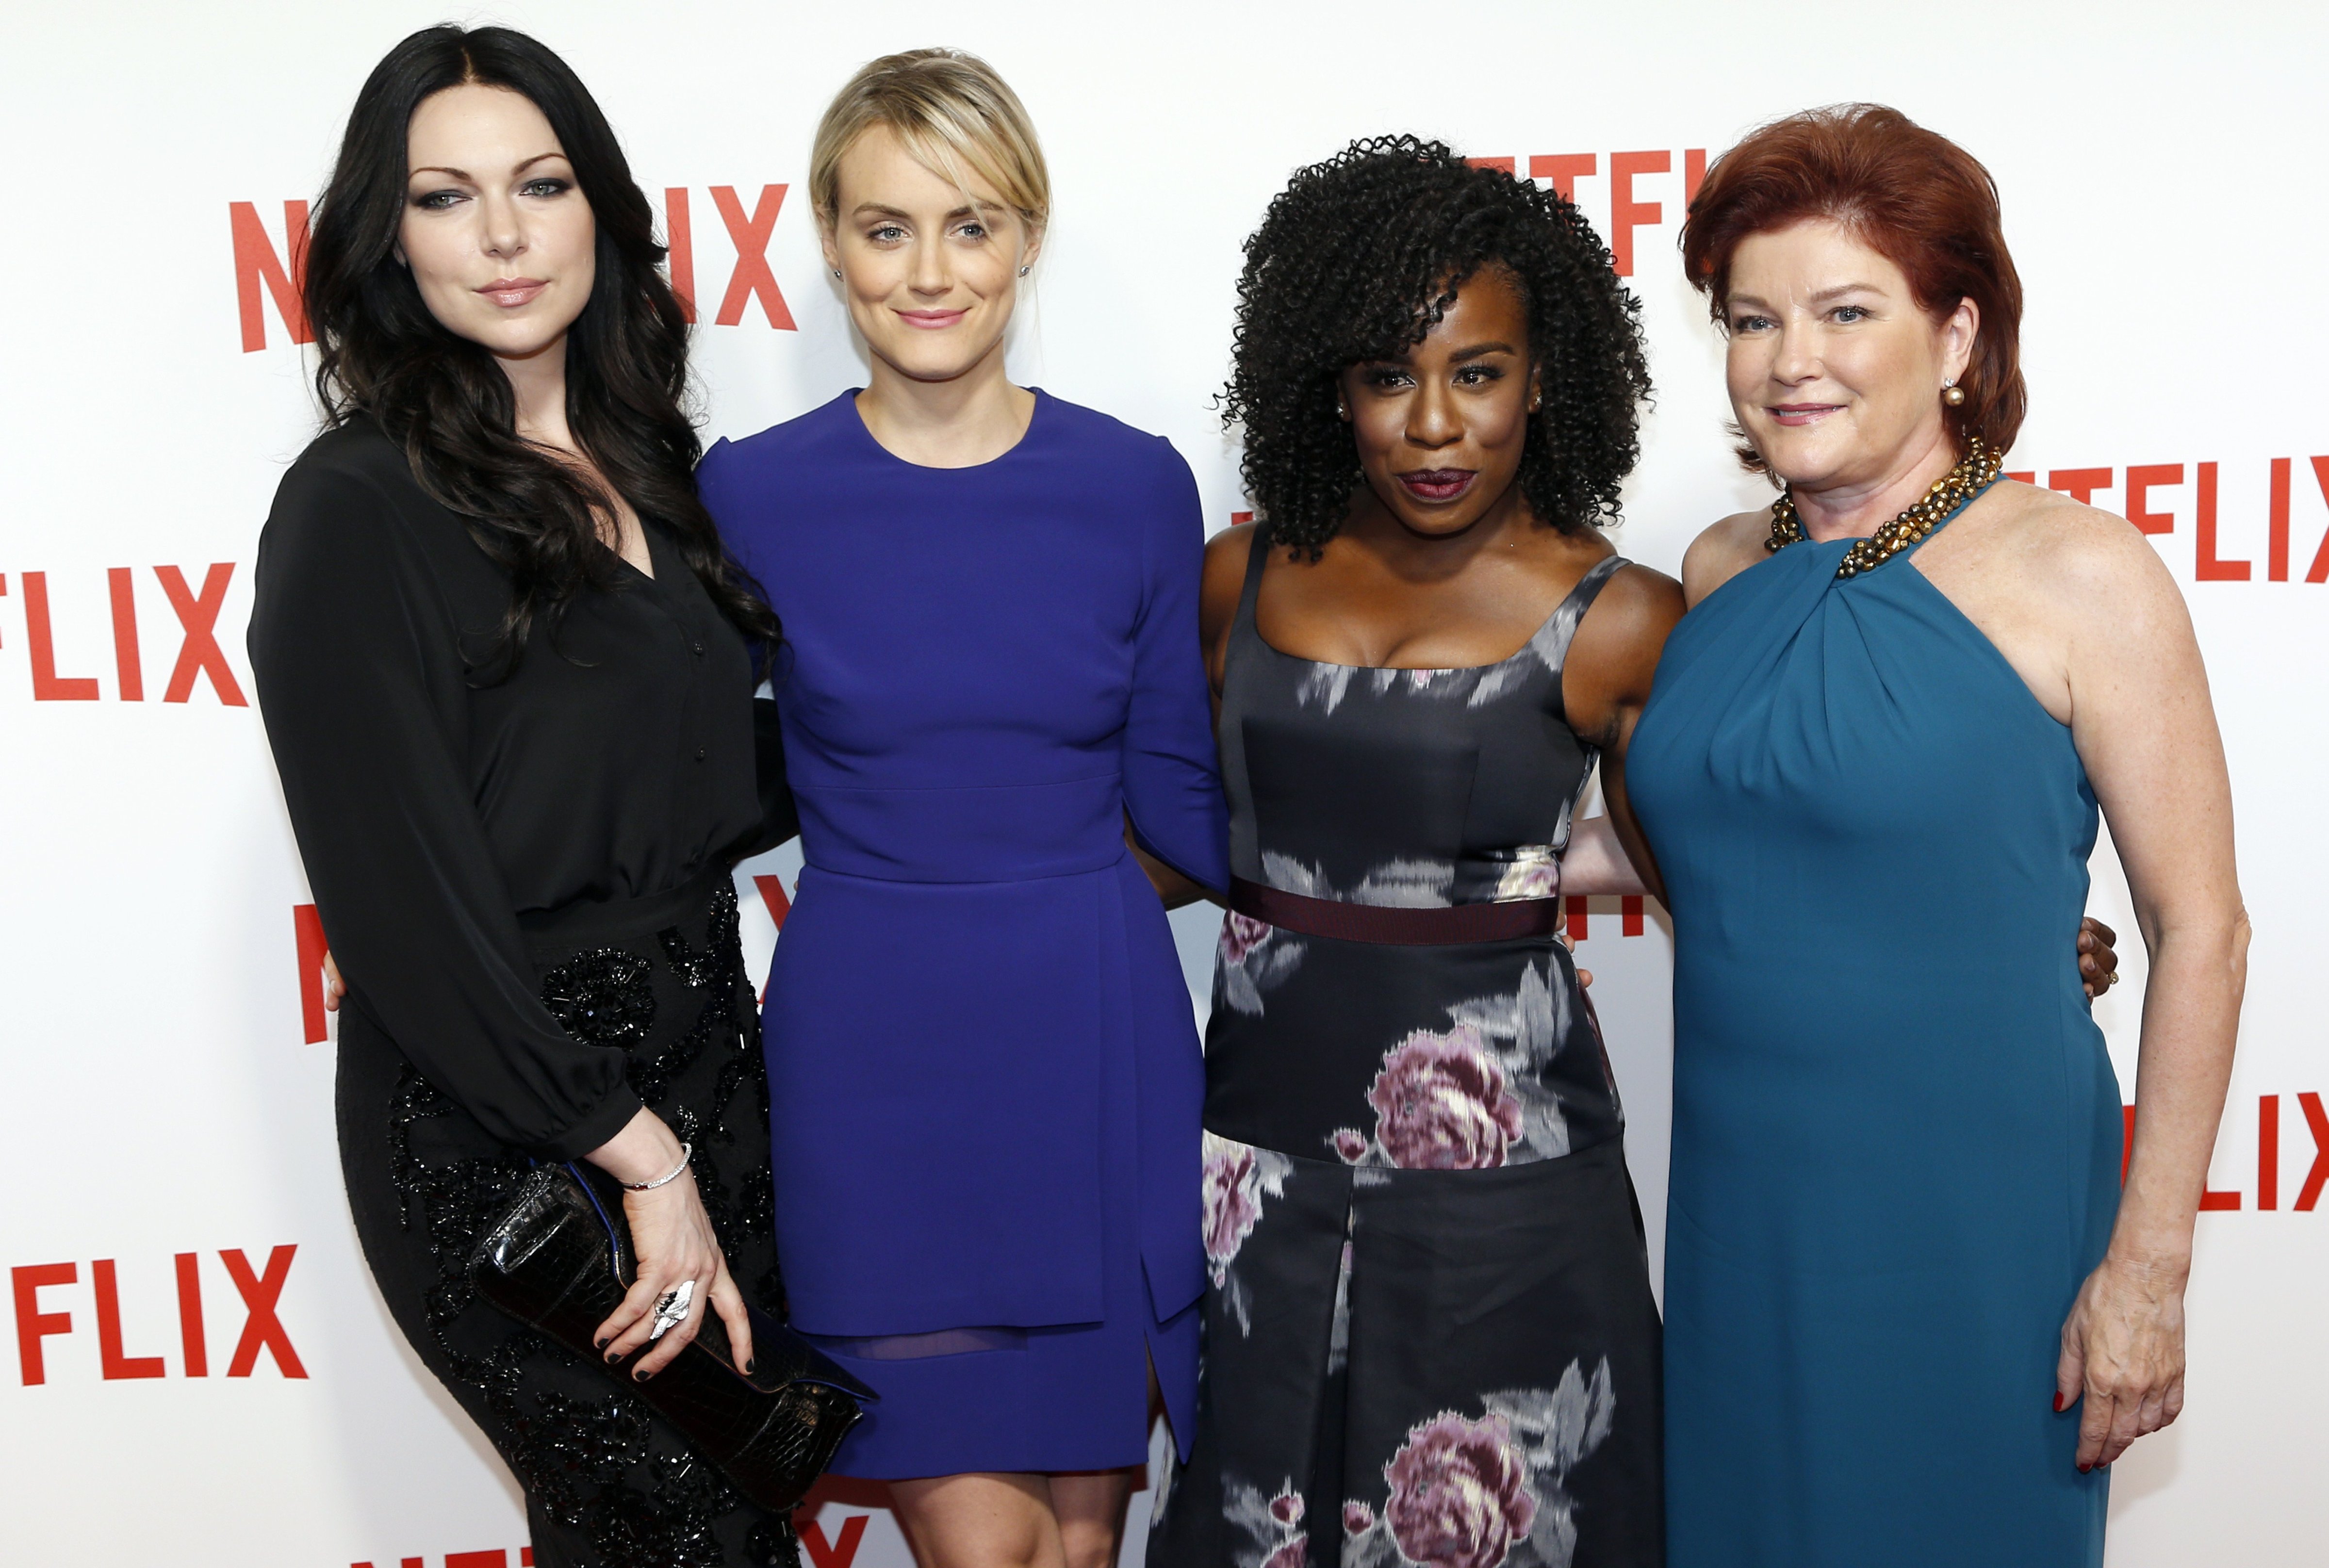 "Orange is the New Black" cast members US actresses Laura Prepon, Taylor Schilling, Uzo Aduba and Kate Mulgrew pose during a photocall for the launch of Netflix in France on September 15, 2014 in Paris. (Francois Guillot—AFP/Getty Images)